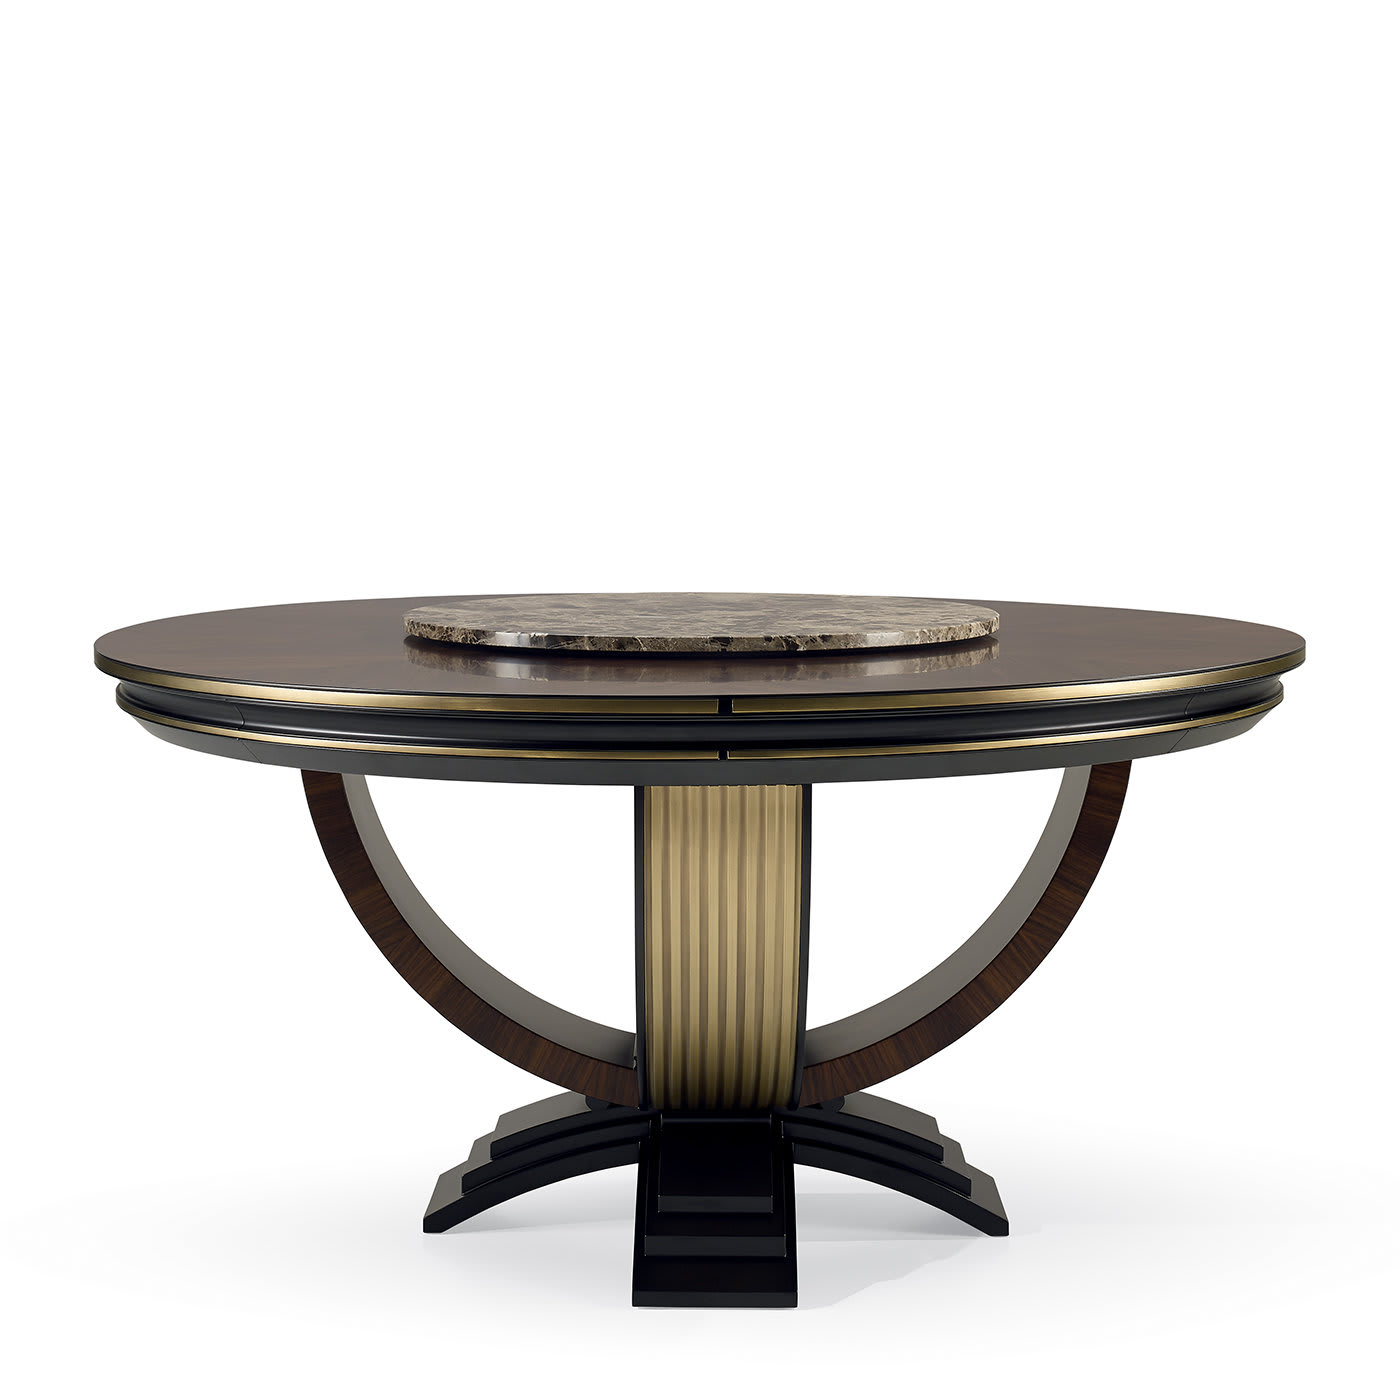 Round Dining Table with Emperador Marble Lazy Susan - A.R. Arredamenti